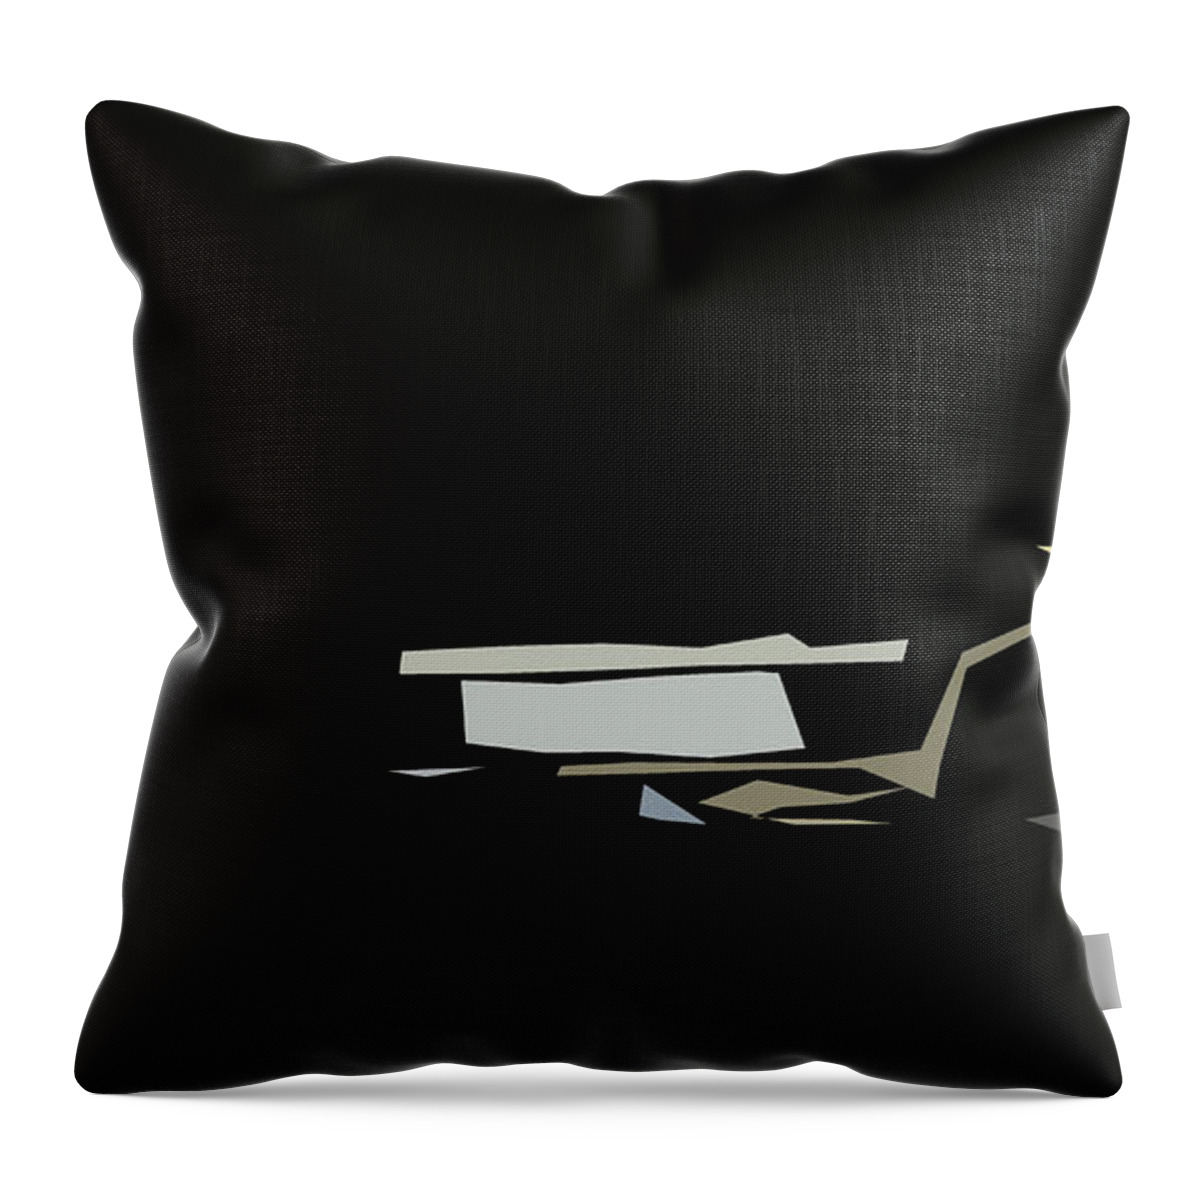 Car Throw Pillow featuring the digital art Gumpert Apollo R Abstract Design #3 by CarsToon Concept